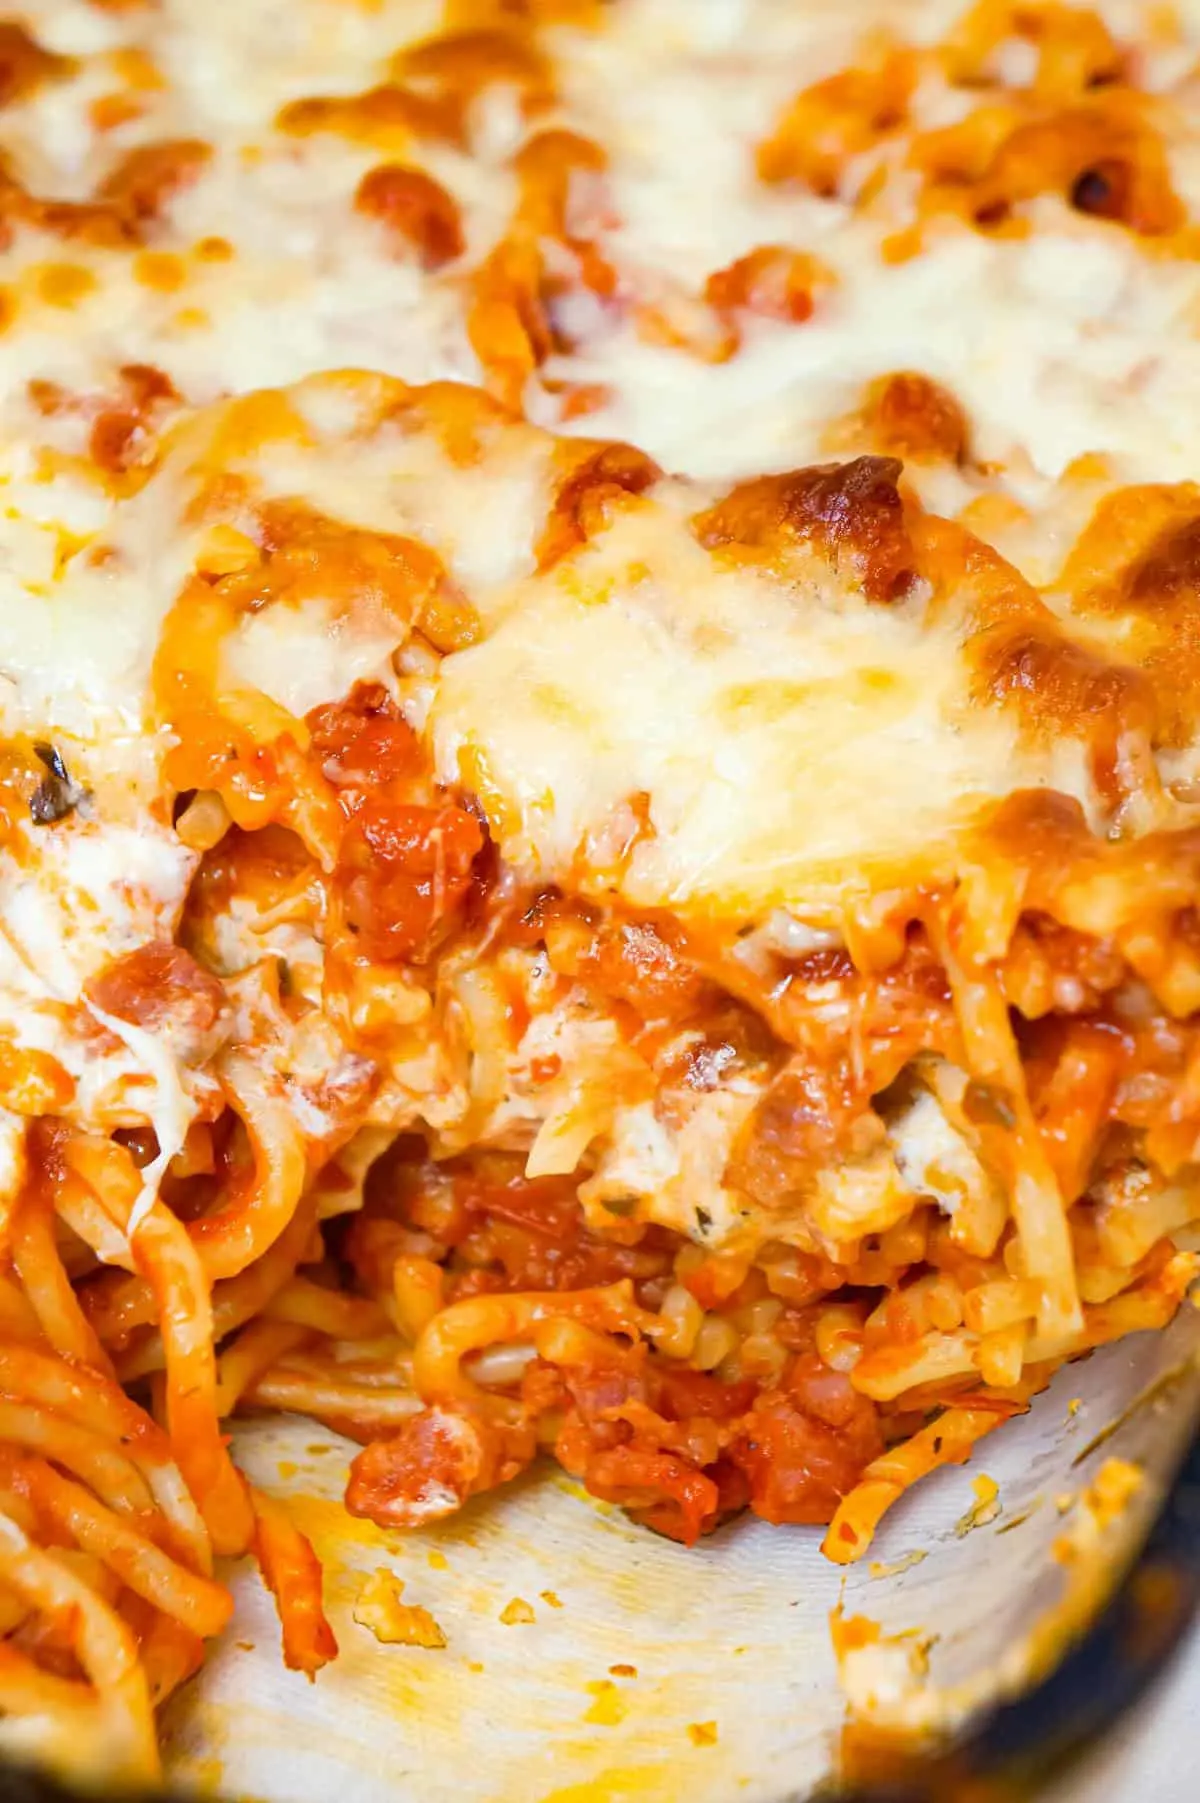 Million Dollar Spaghetti is a delicious baked spaghetti recipe loaded with Italian sausage, cream cheese, sour cream and a blend of shredded Italian cheeses.